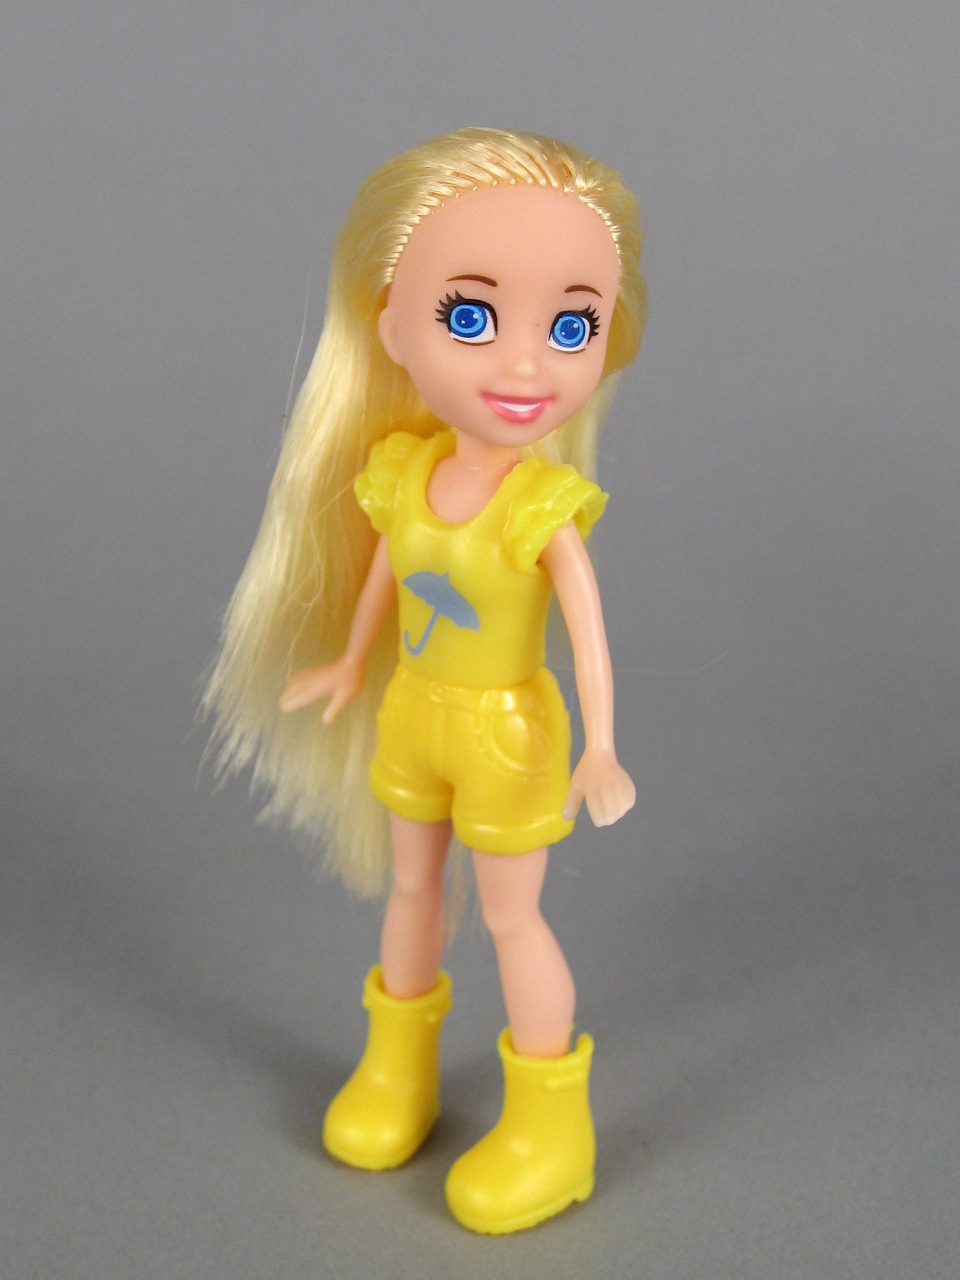 Polly Pocket by Mattel | The Toy Box Philosopher